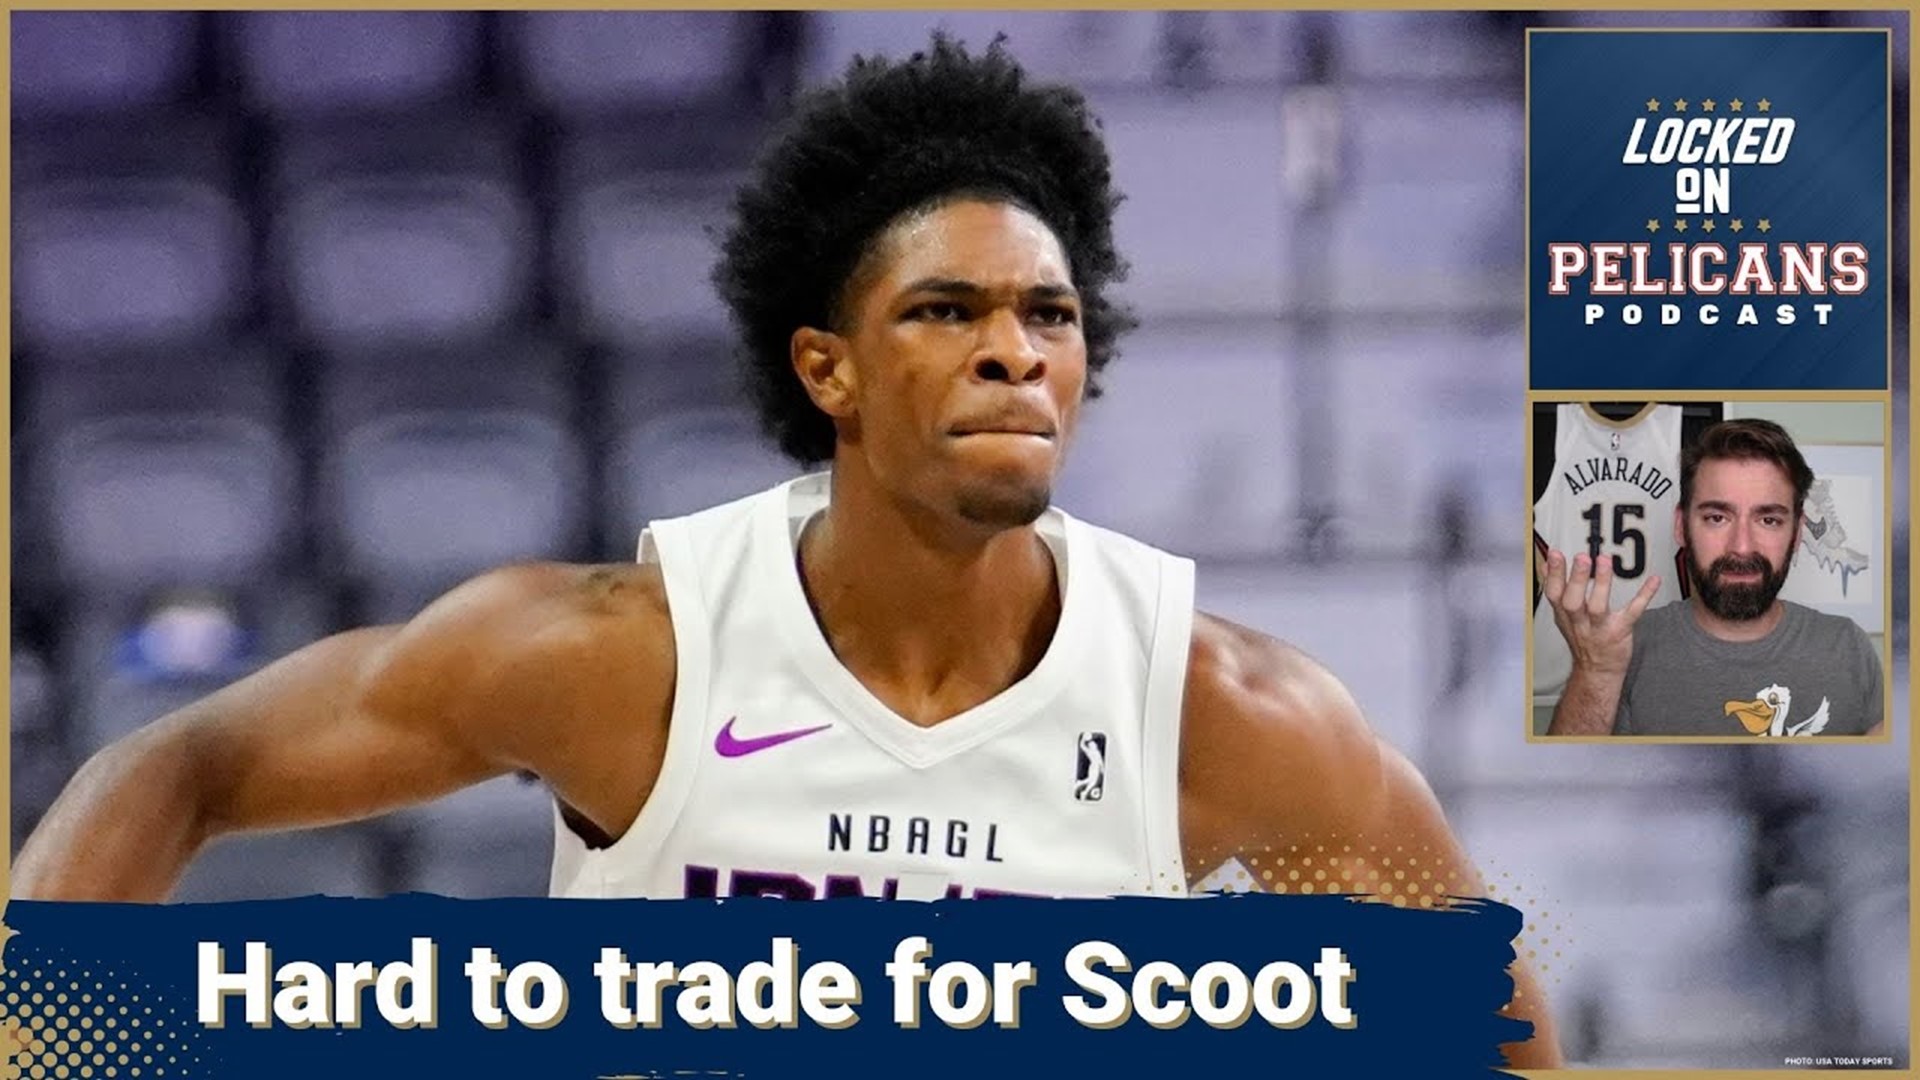 The New Orleans Pelicans may be very interested in Scoot Henderson. They may be willing to including Zion Williamson or Brandon Ingram in a trade